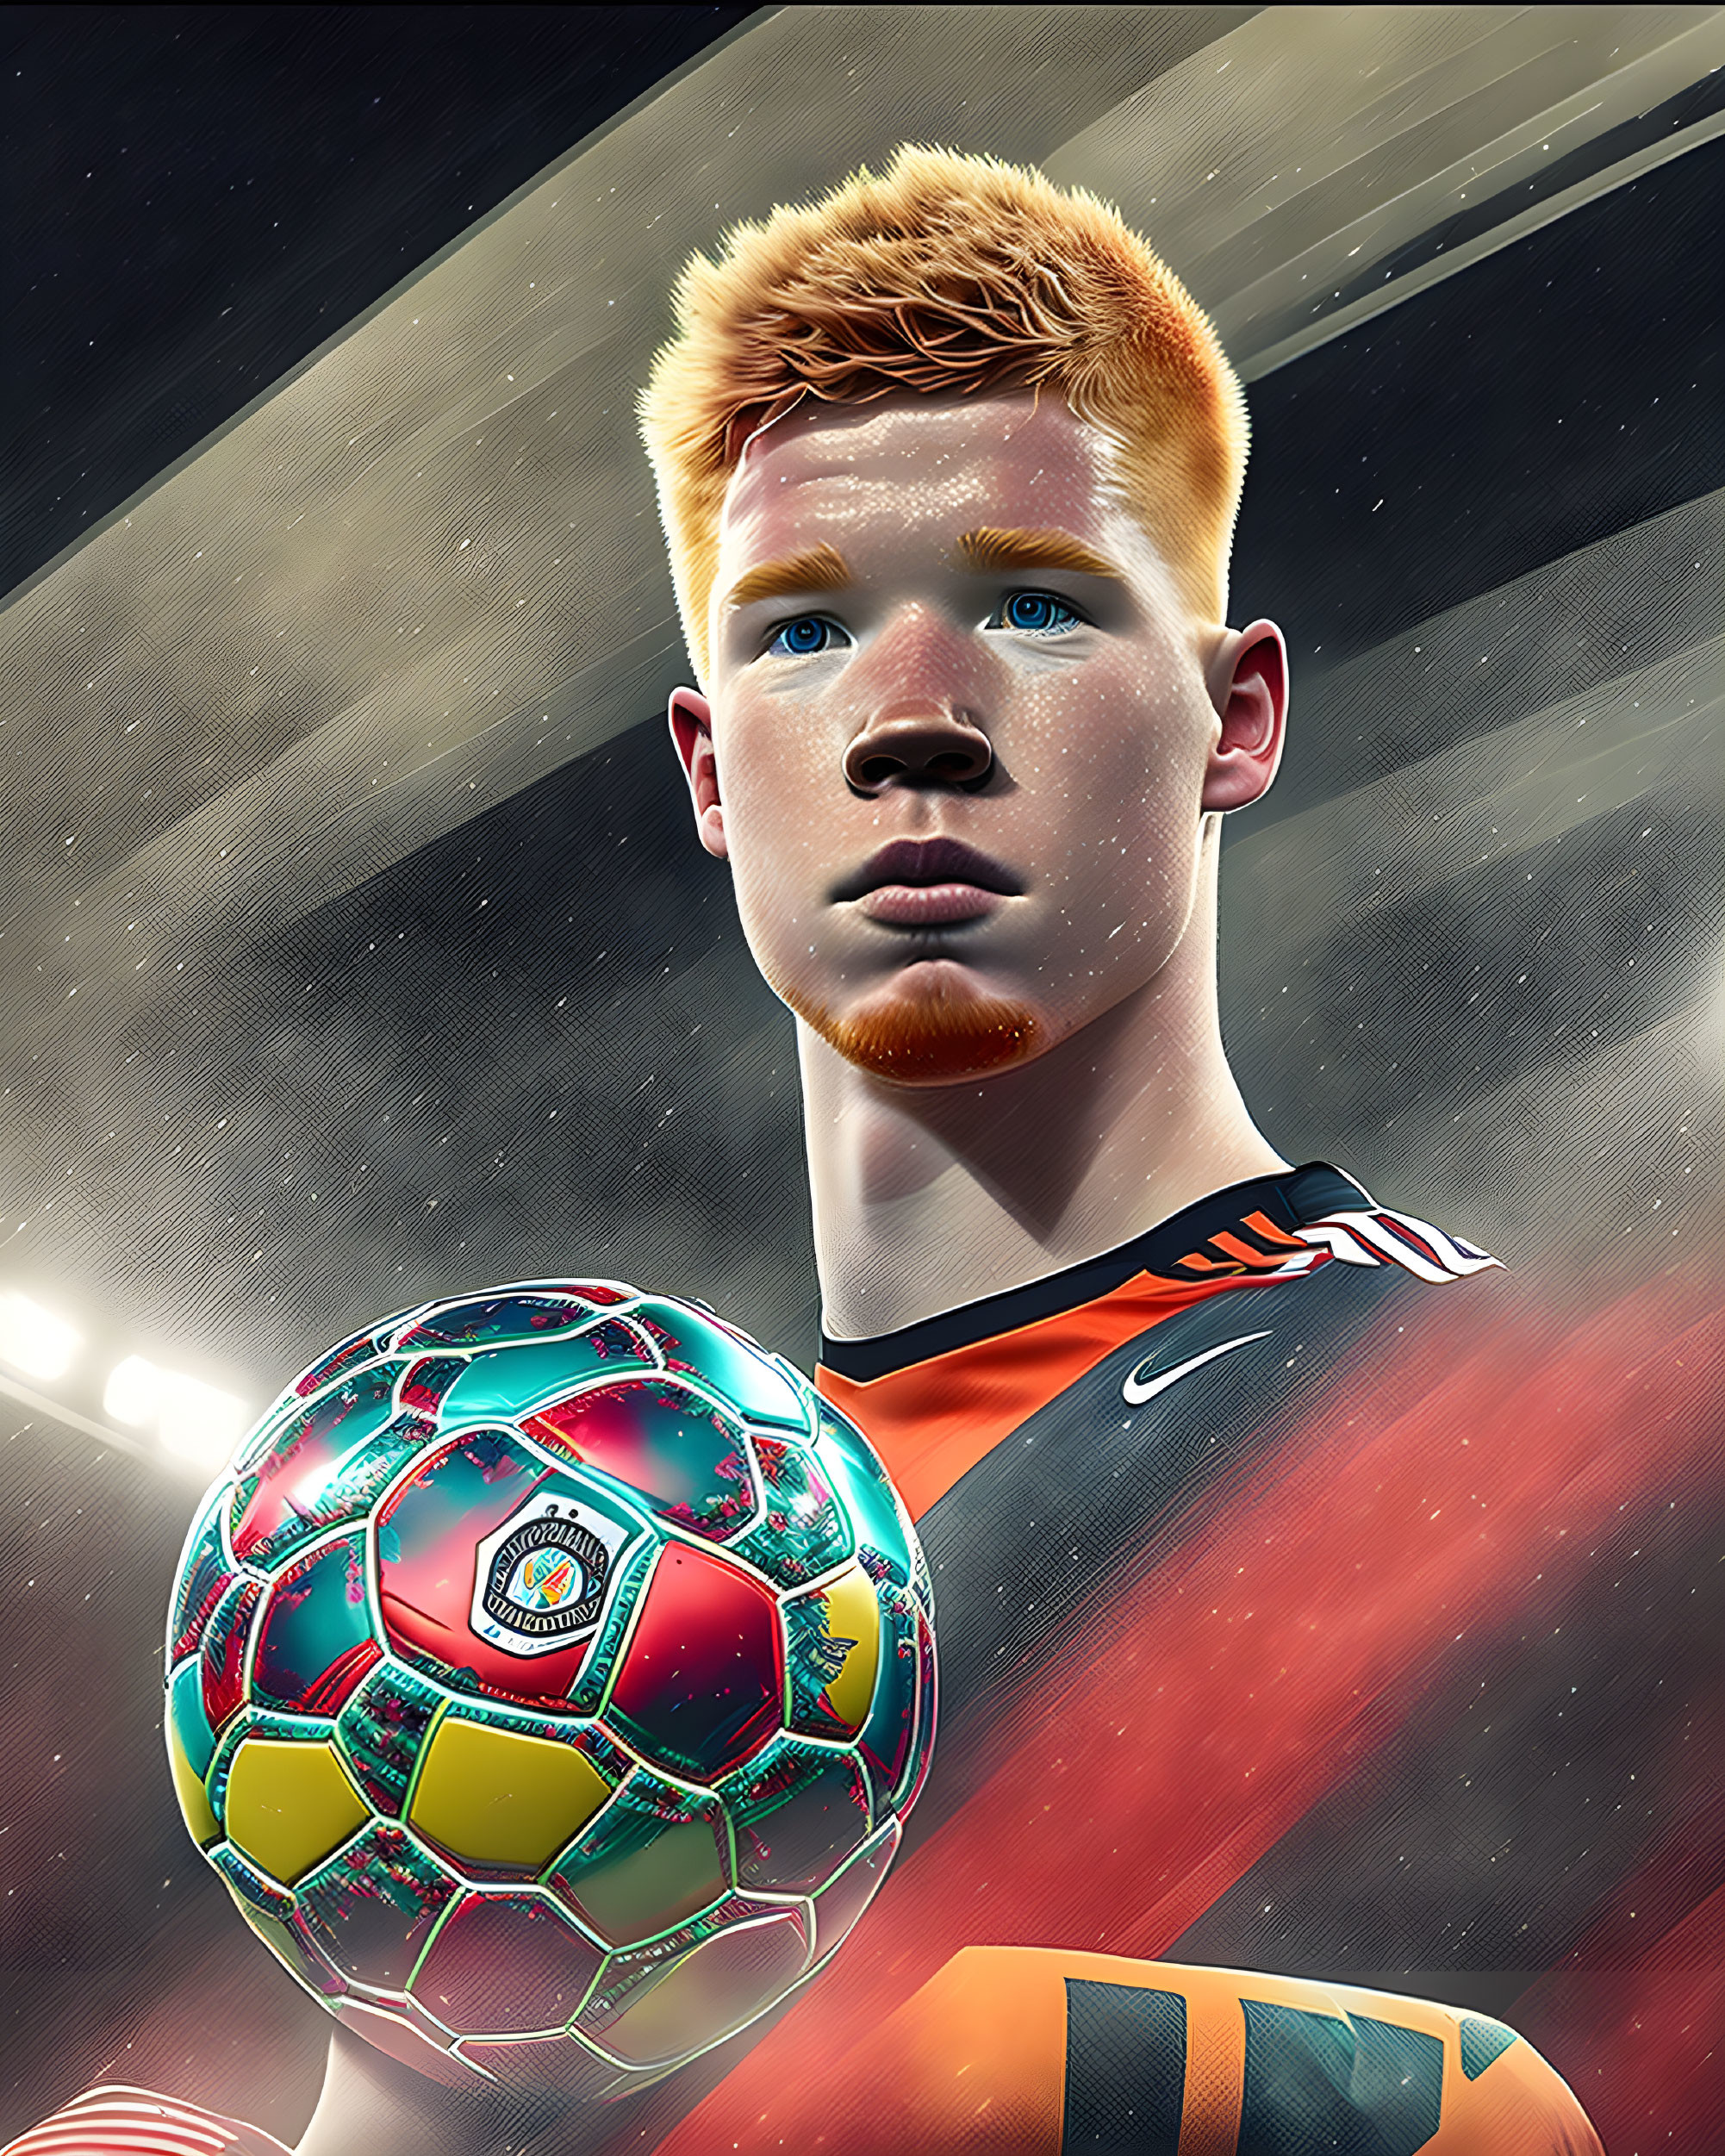 Vibrant digital portrait with orange hair and soccer ball on abstract background